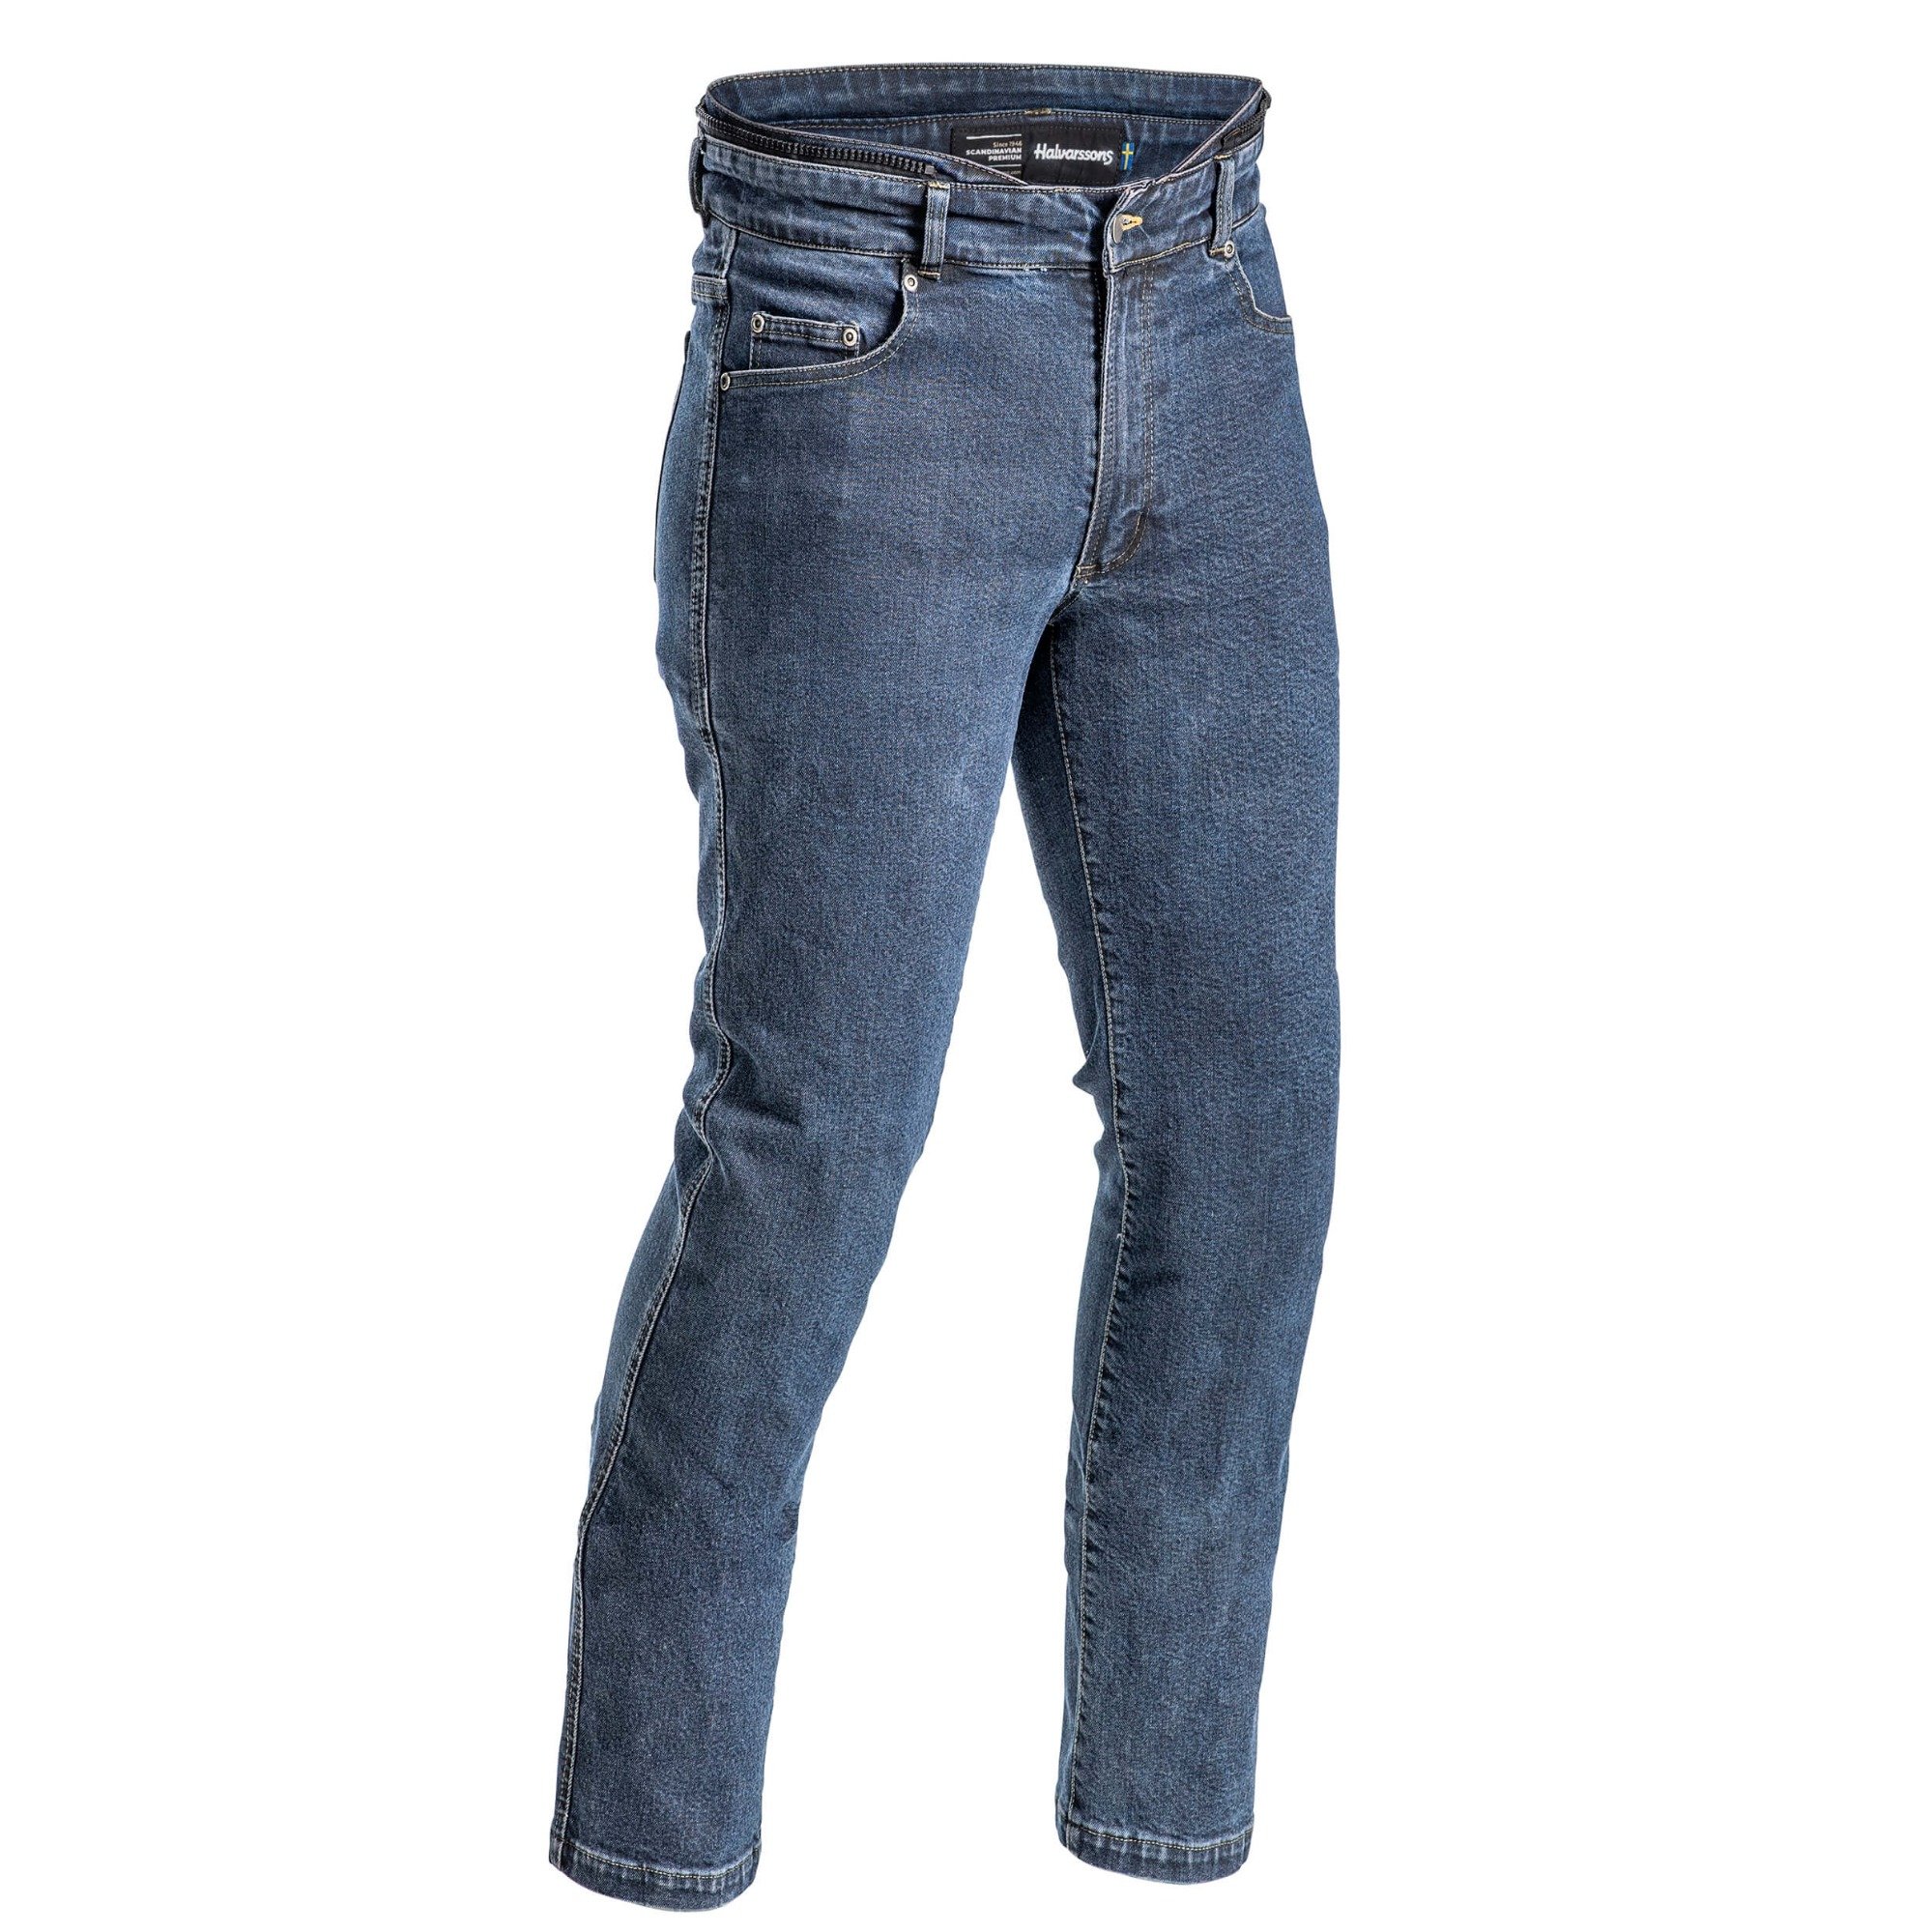 Image of Halvarssons Jeans Rogen Blue Size 58 ID 6438235239003